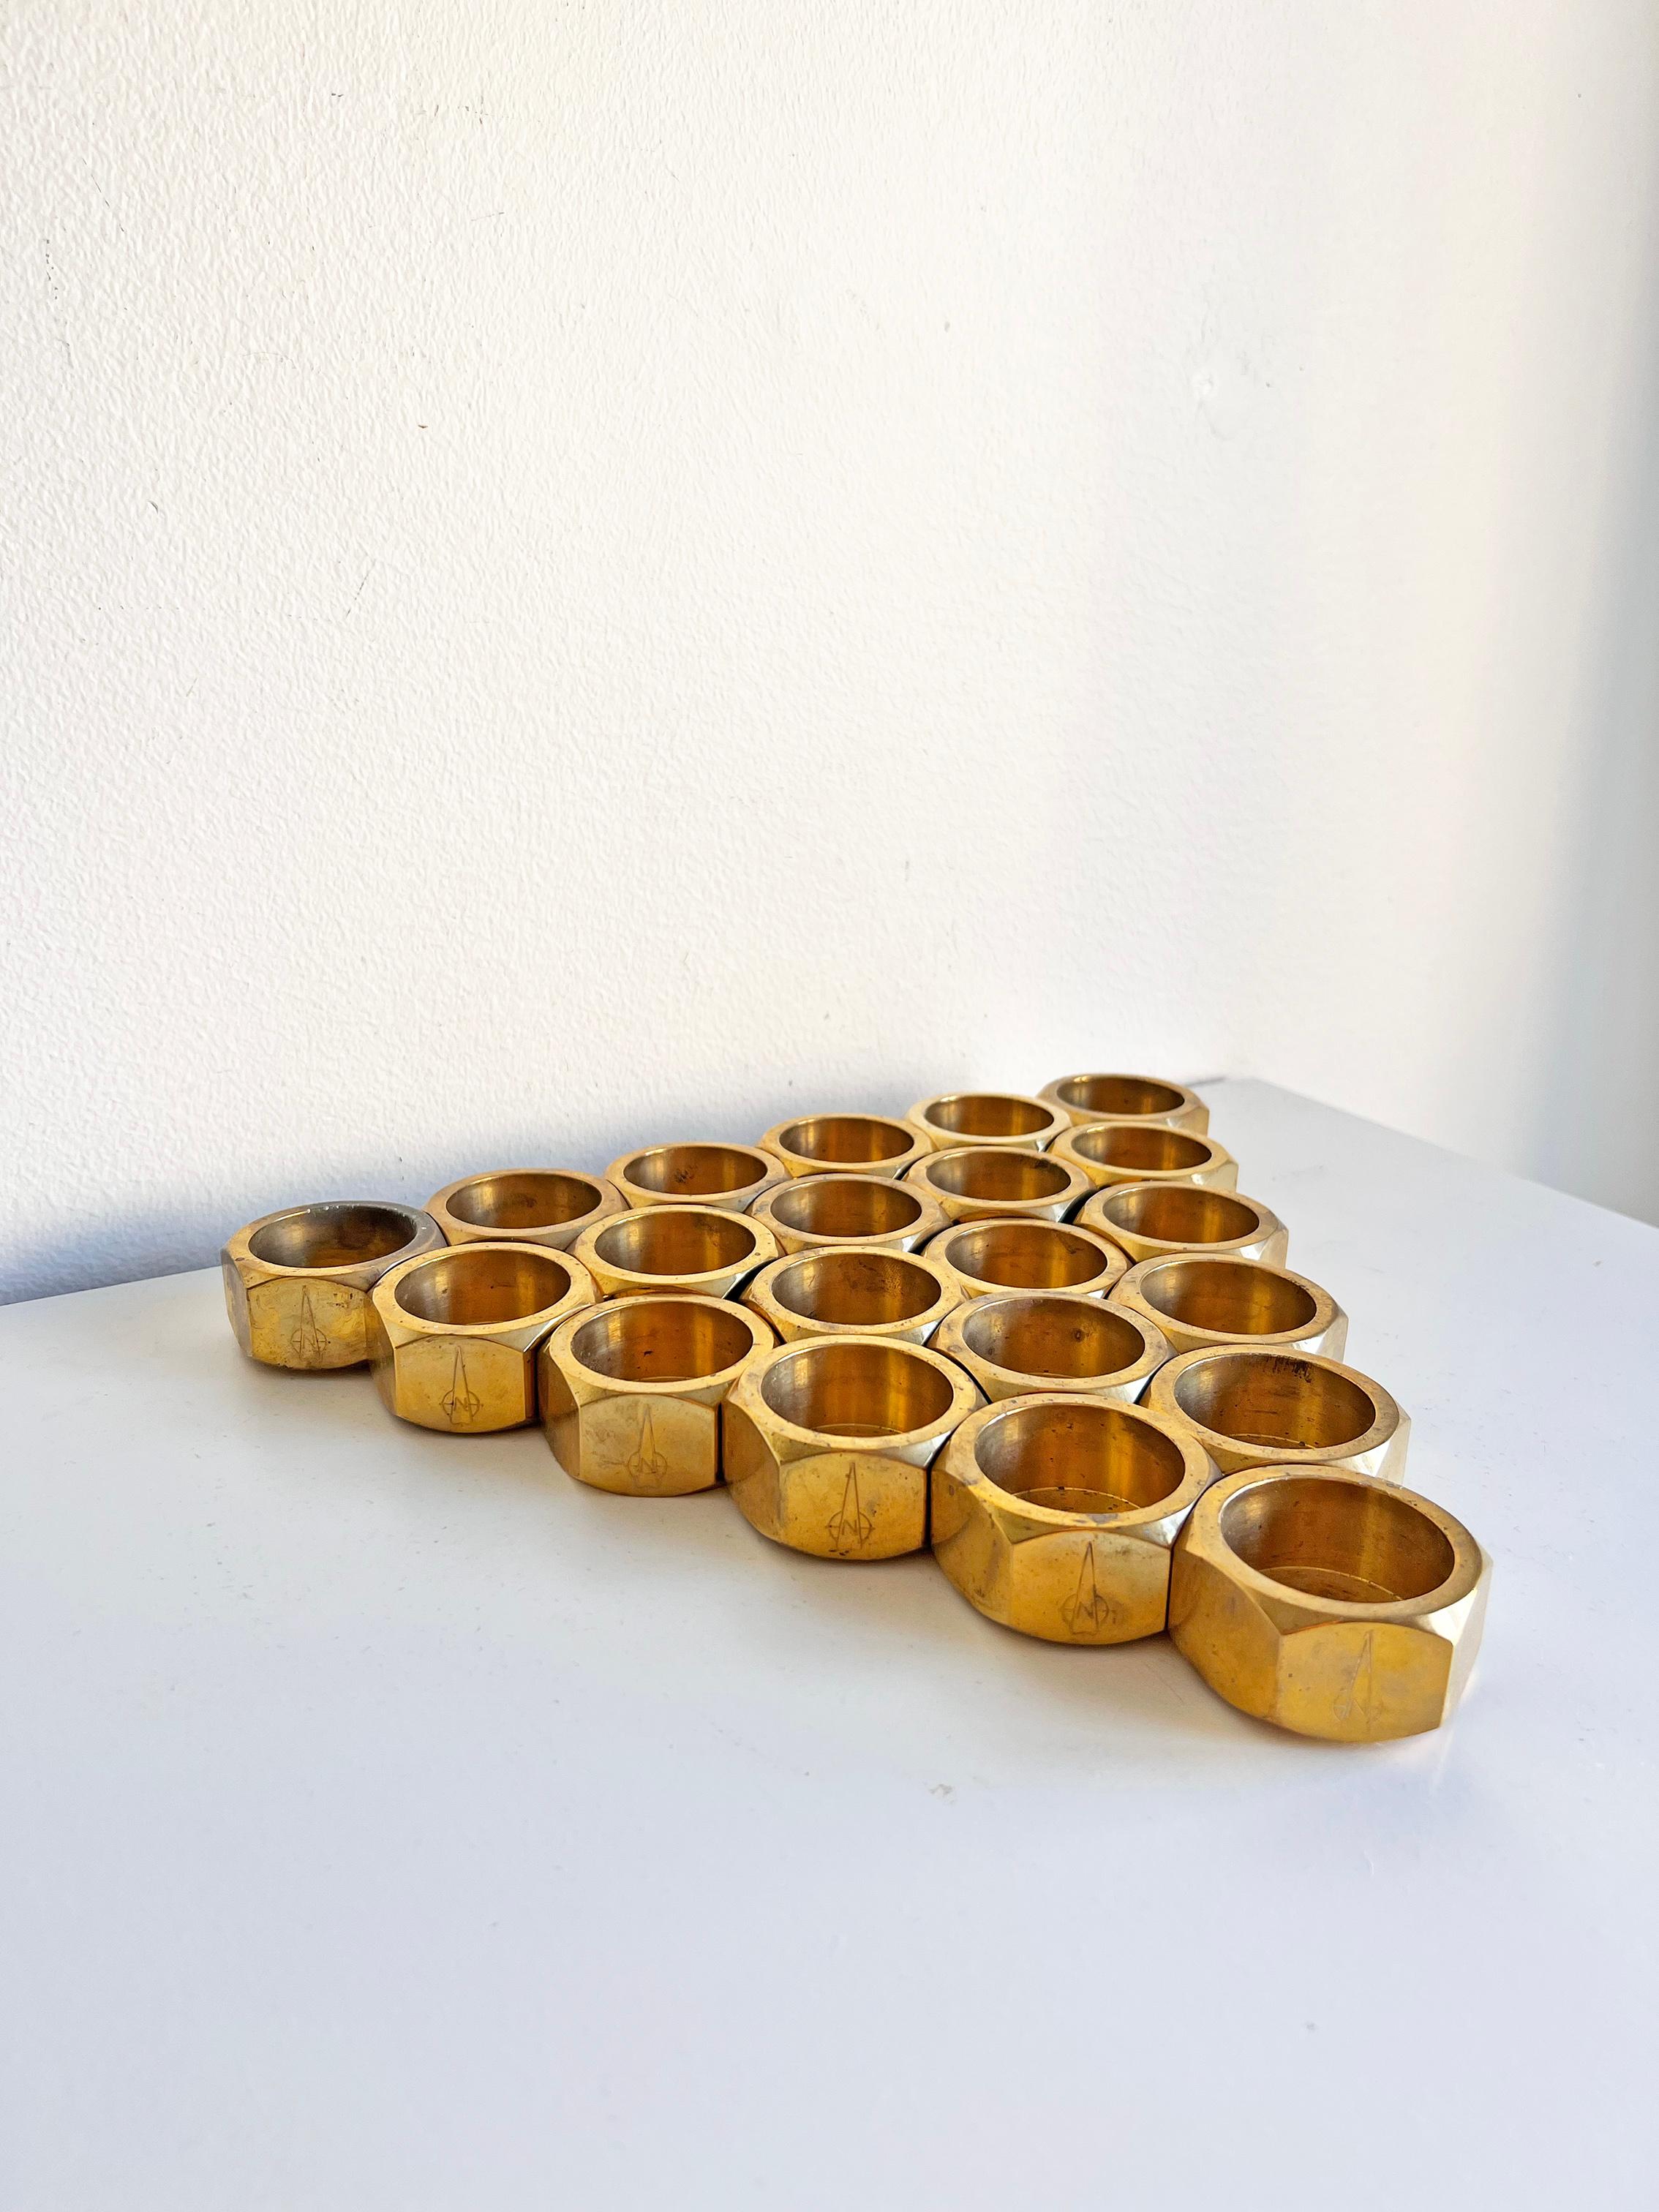 Swedish modern set of 21 candle holders in brass.
Unknown designer and maker, most probably produced In Sweden. 
Marked with an unknown label, as seen on the pictures.
Good vintage condition, wear consistent with age and use. Age-appropriate